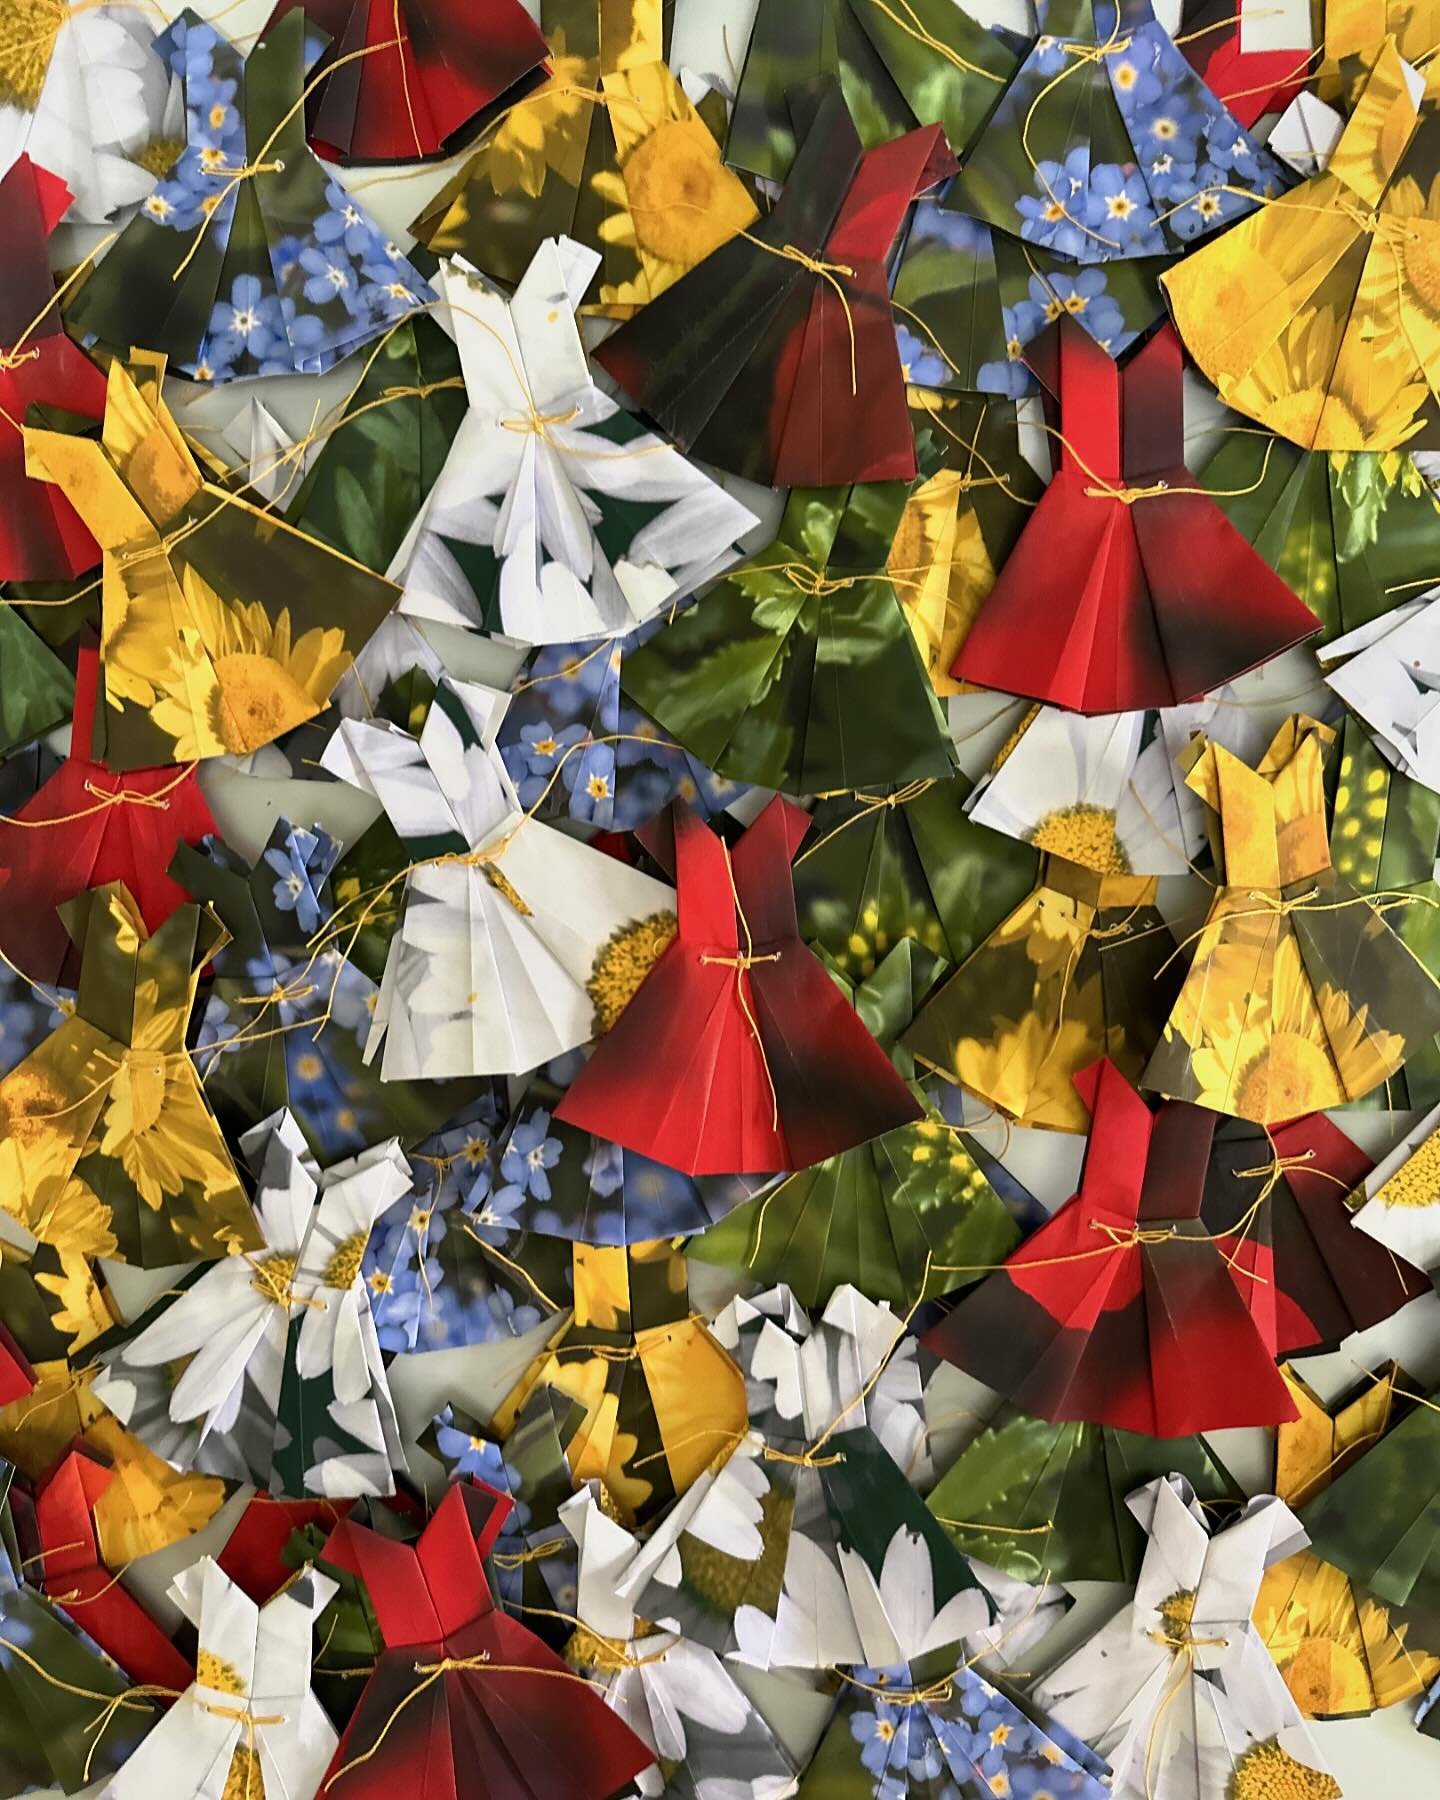 180 little paper dresses. 10 times 18. 10 times chai - our Jewish symbol of life.
On this day that would be her 87th birthday - my mother&rsquo;s garden continues to bloom and to grow.
We are all our mothers&rsquo; gardens.
We honor. We remember. We 